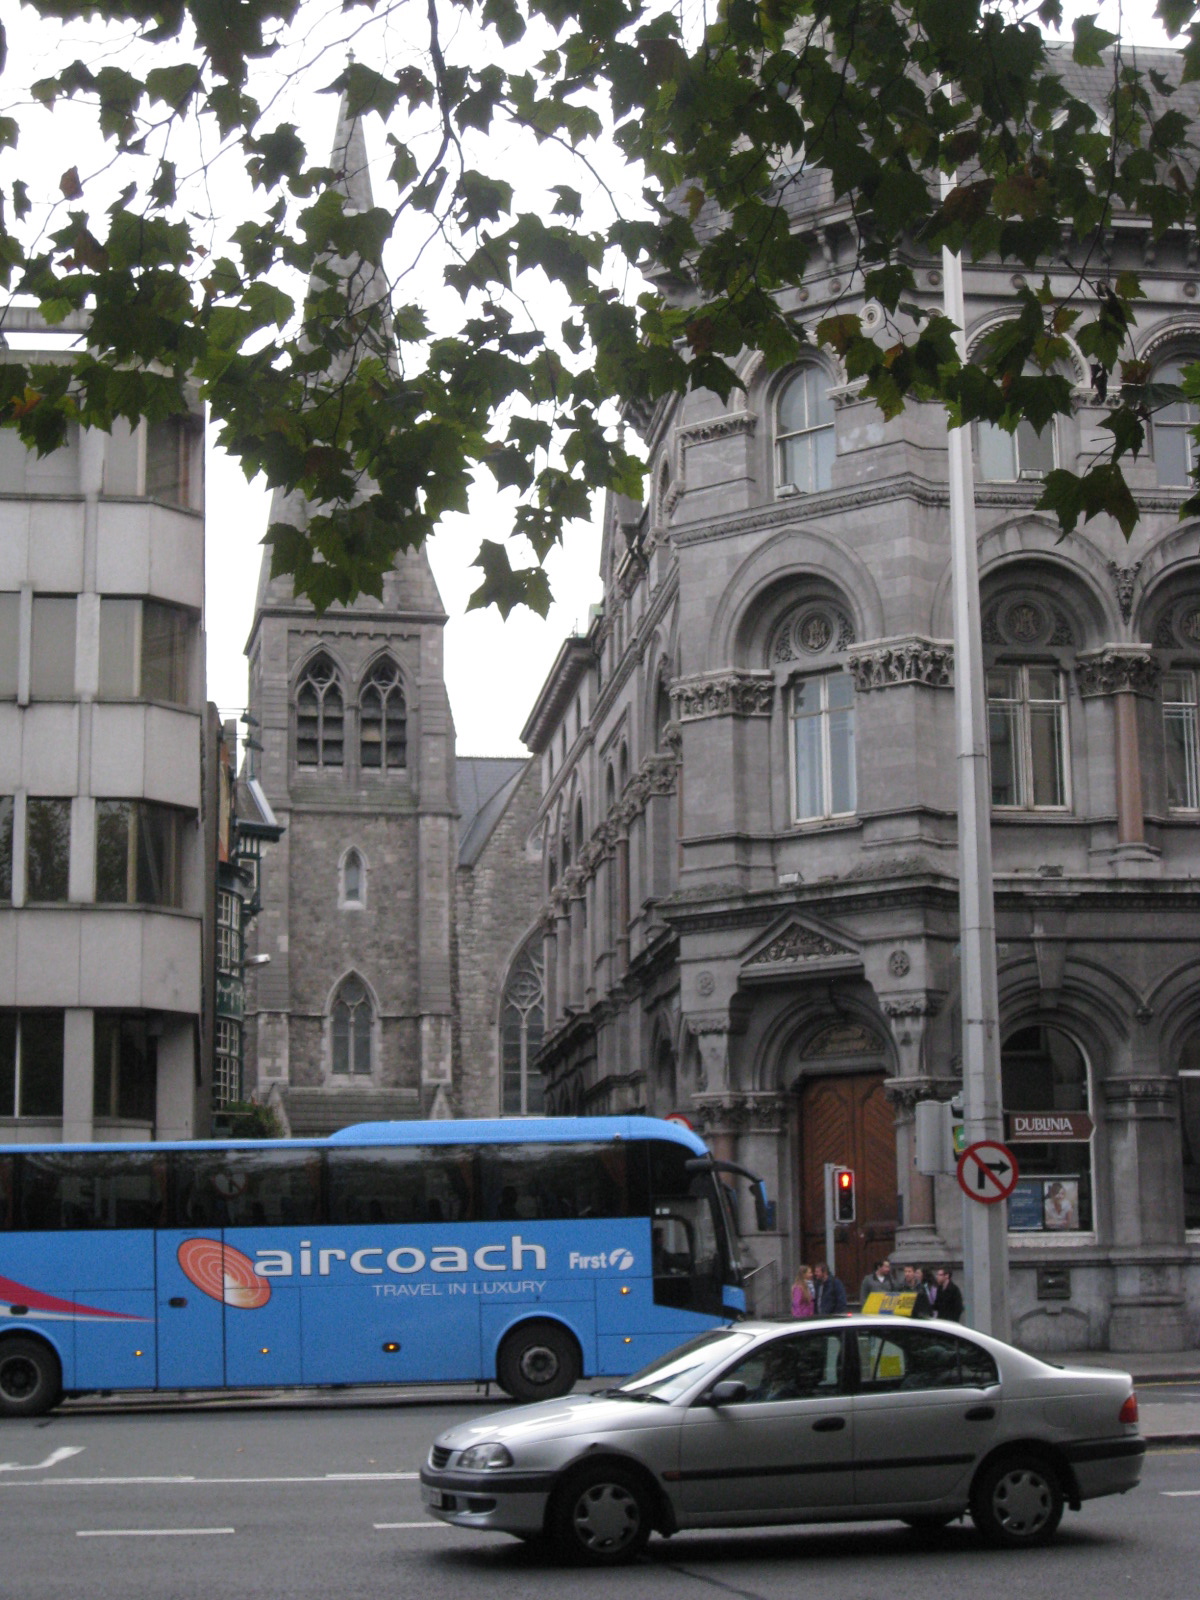 The variety of architecture visible from Dame Street